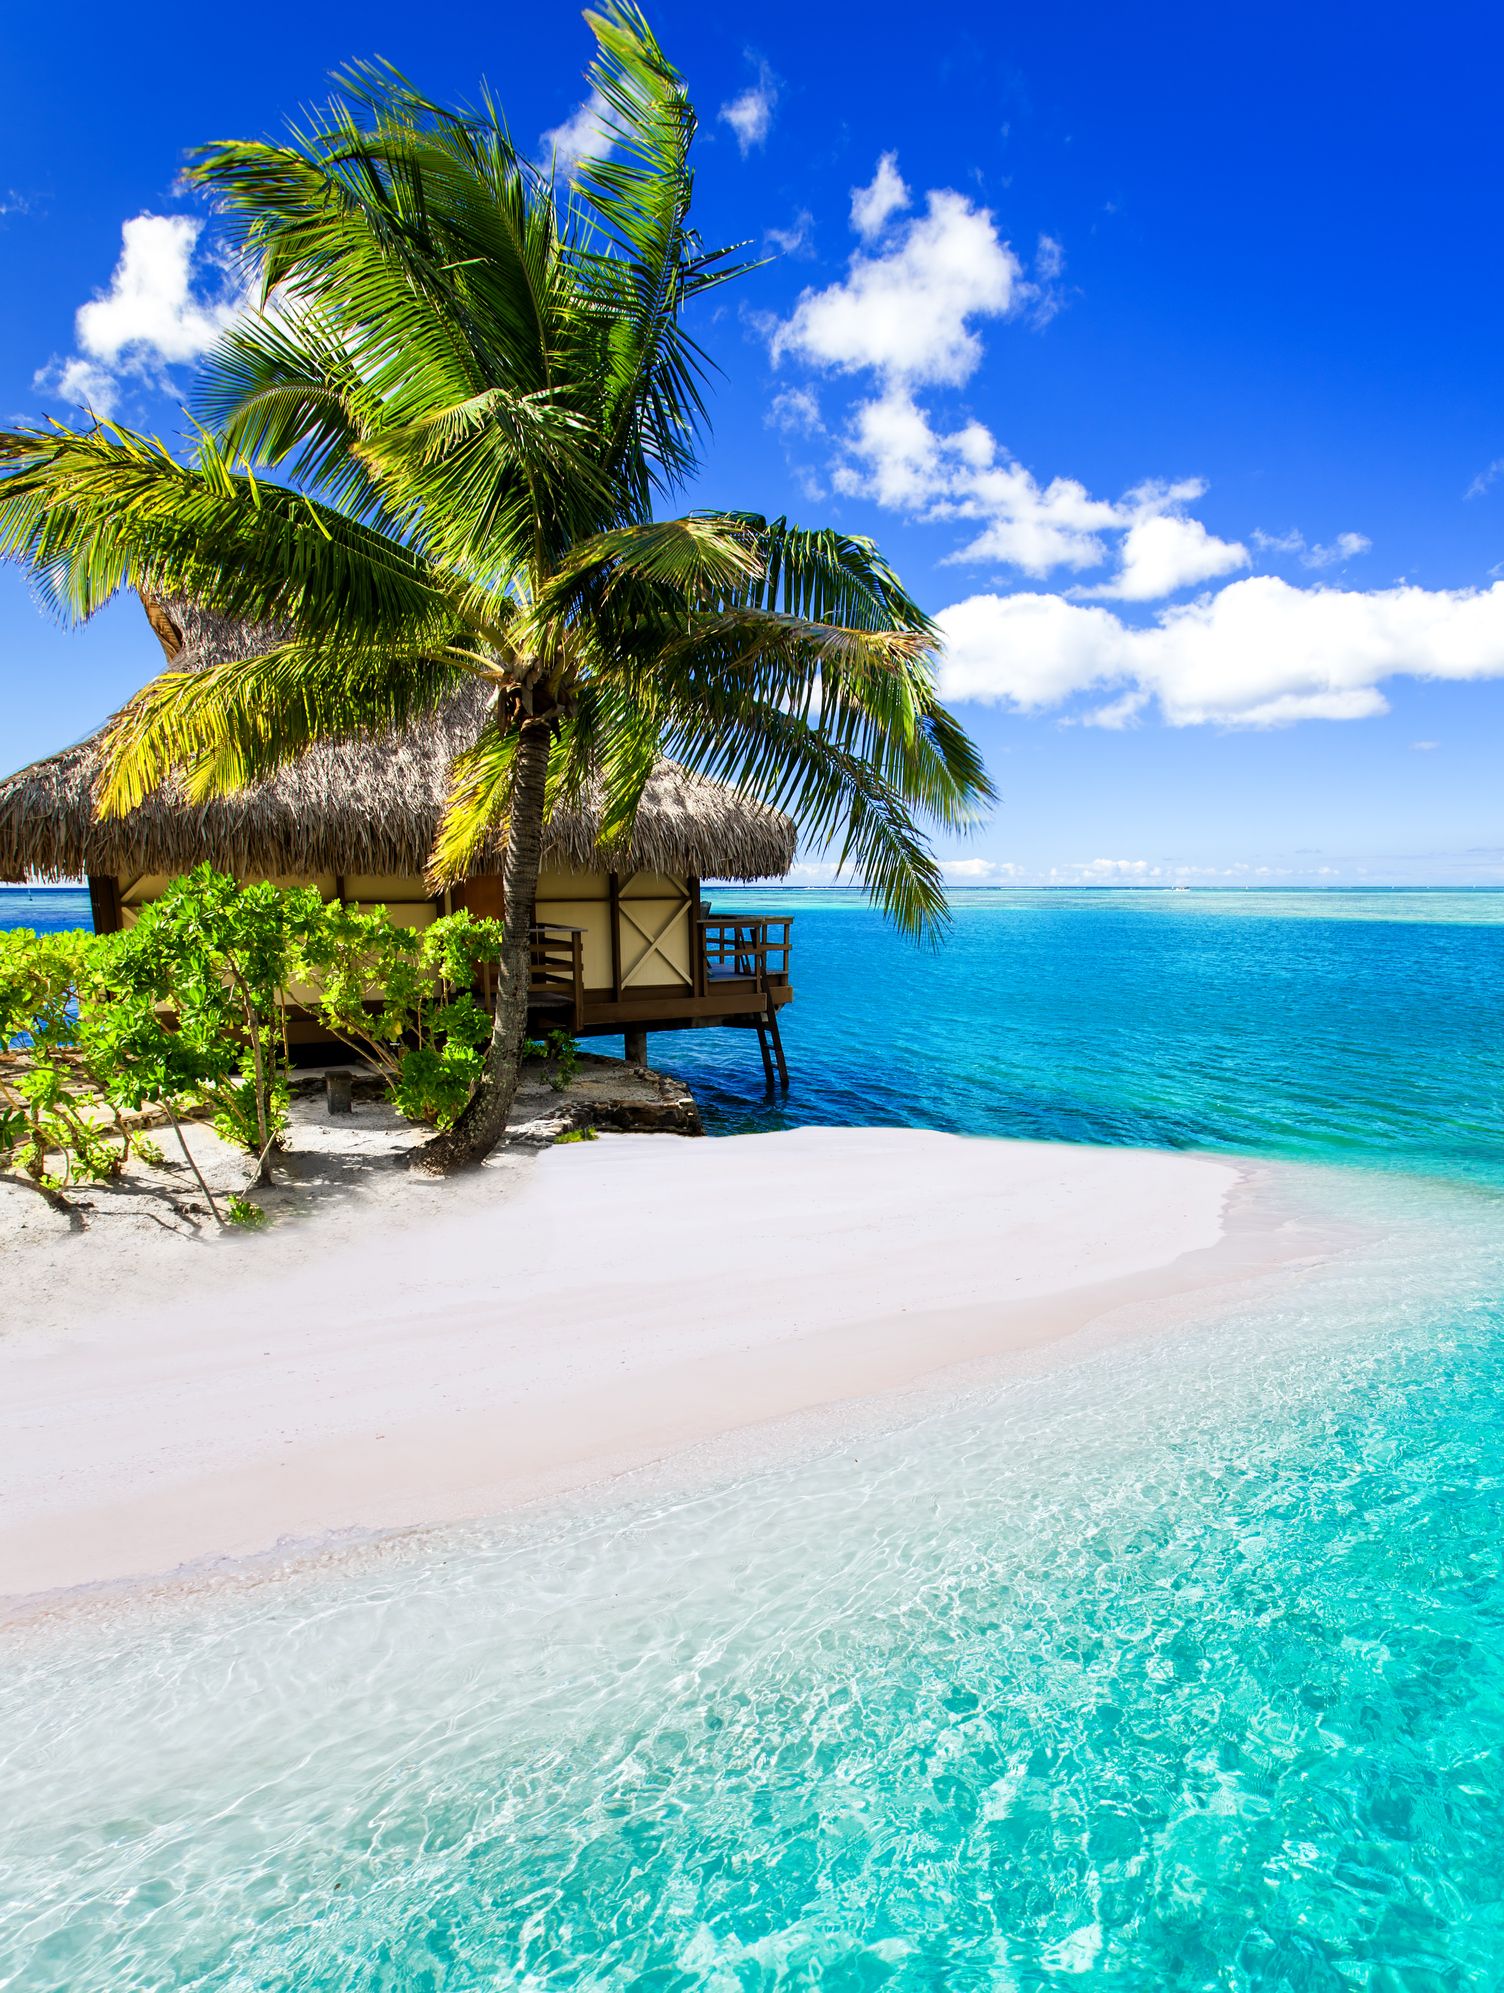 13 Best Islands in the World to Visit - Island Vacations to Take